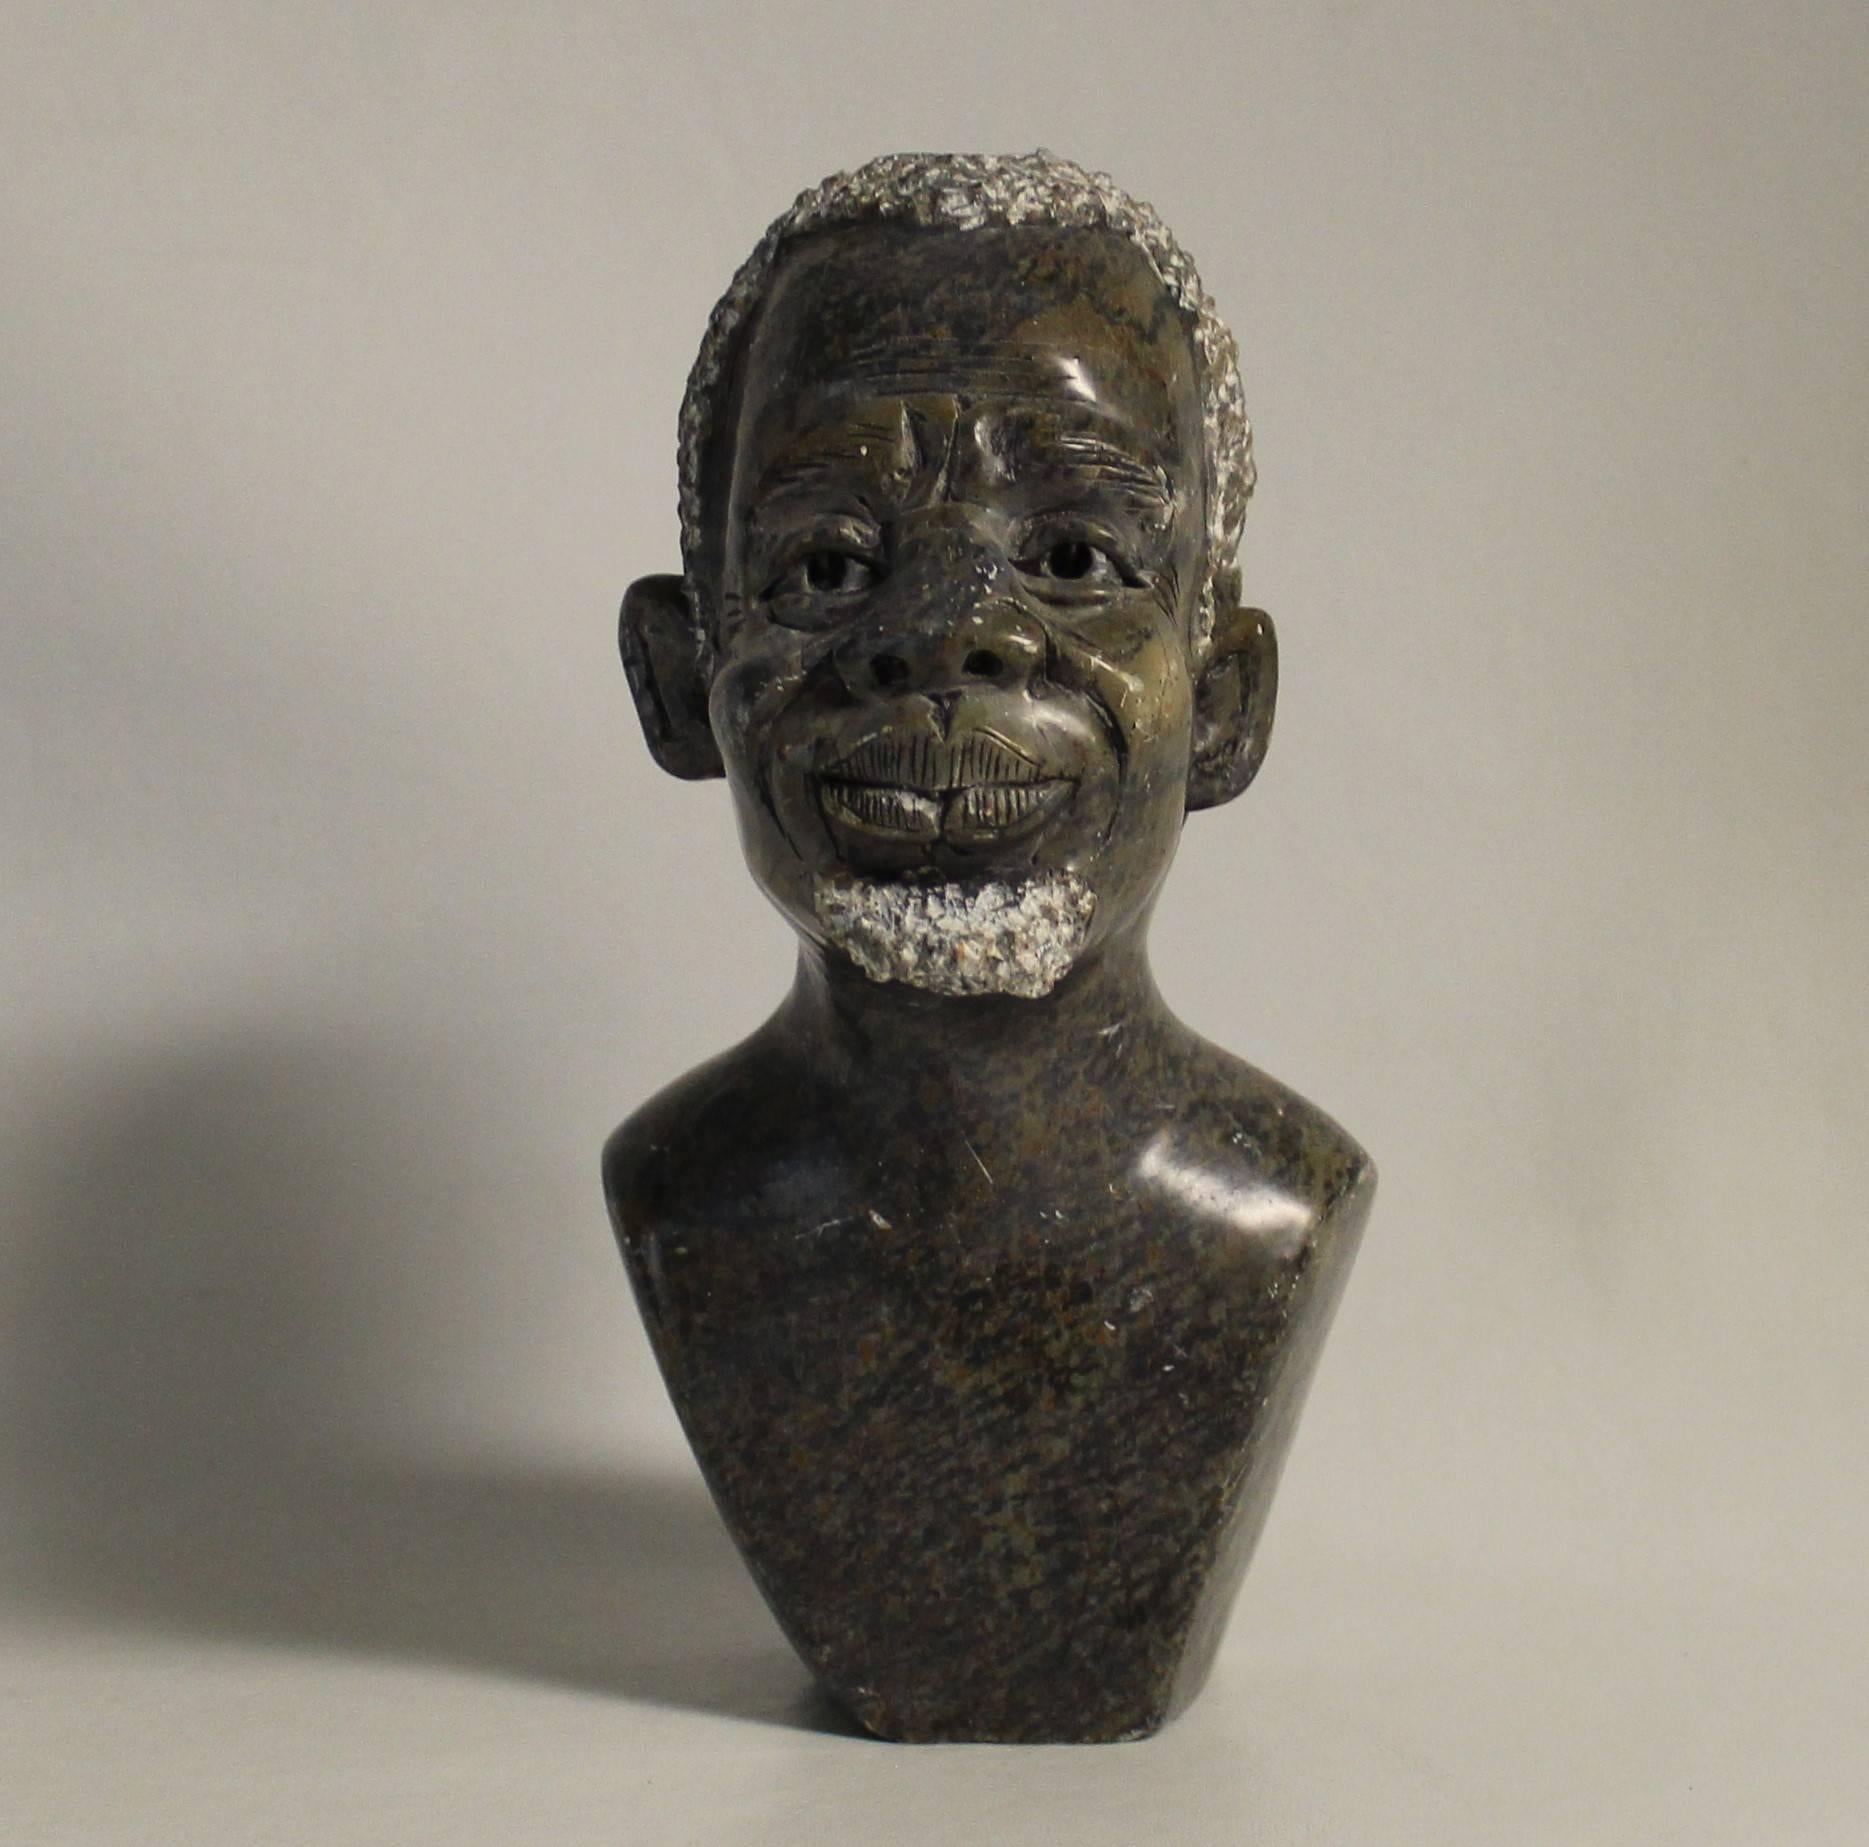 African Shona art sculpture from Zimbabwe's Shona tribe and carved from serpentine stone.